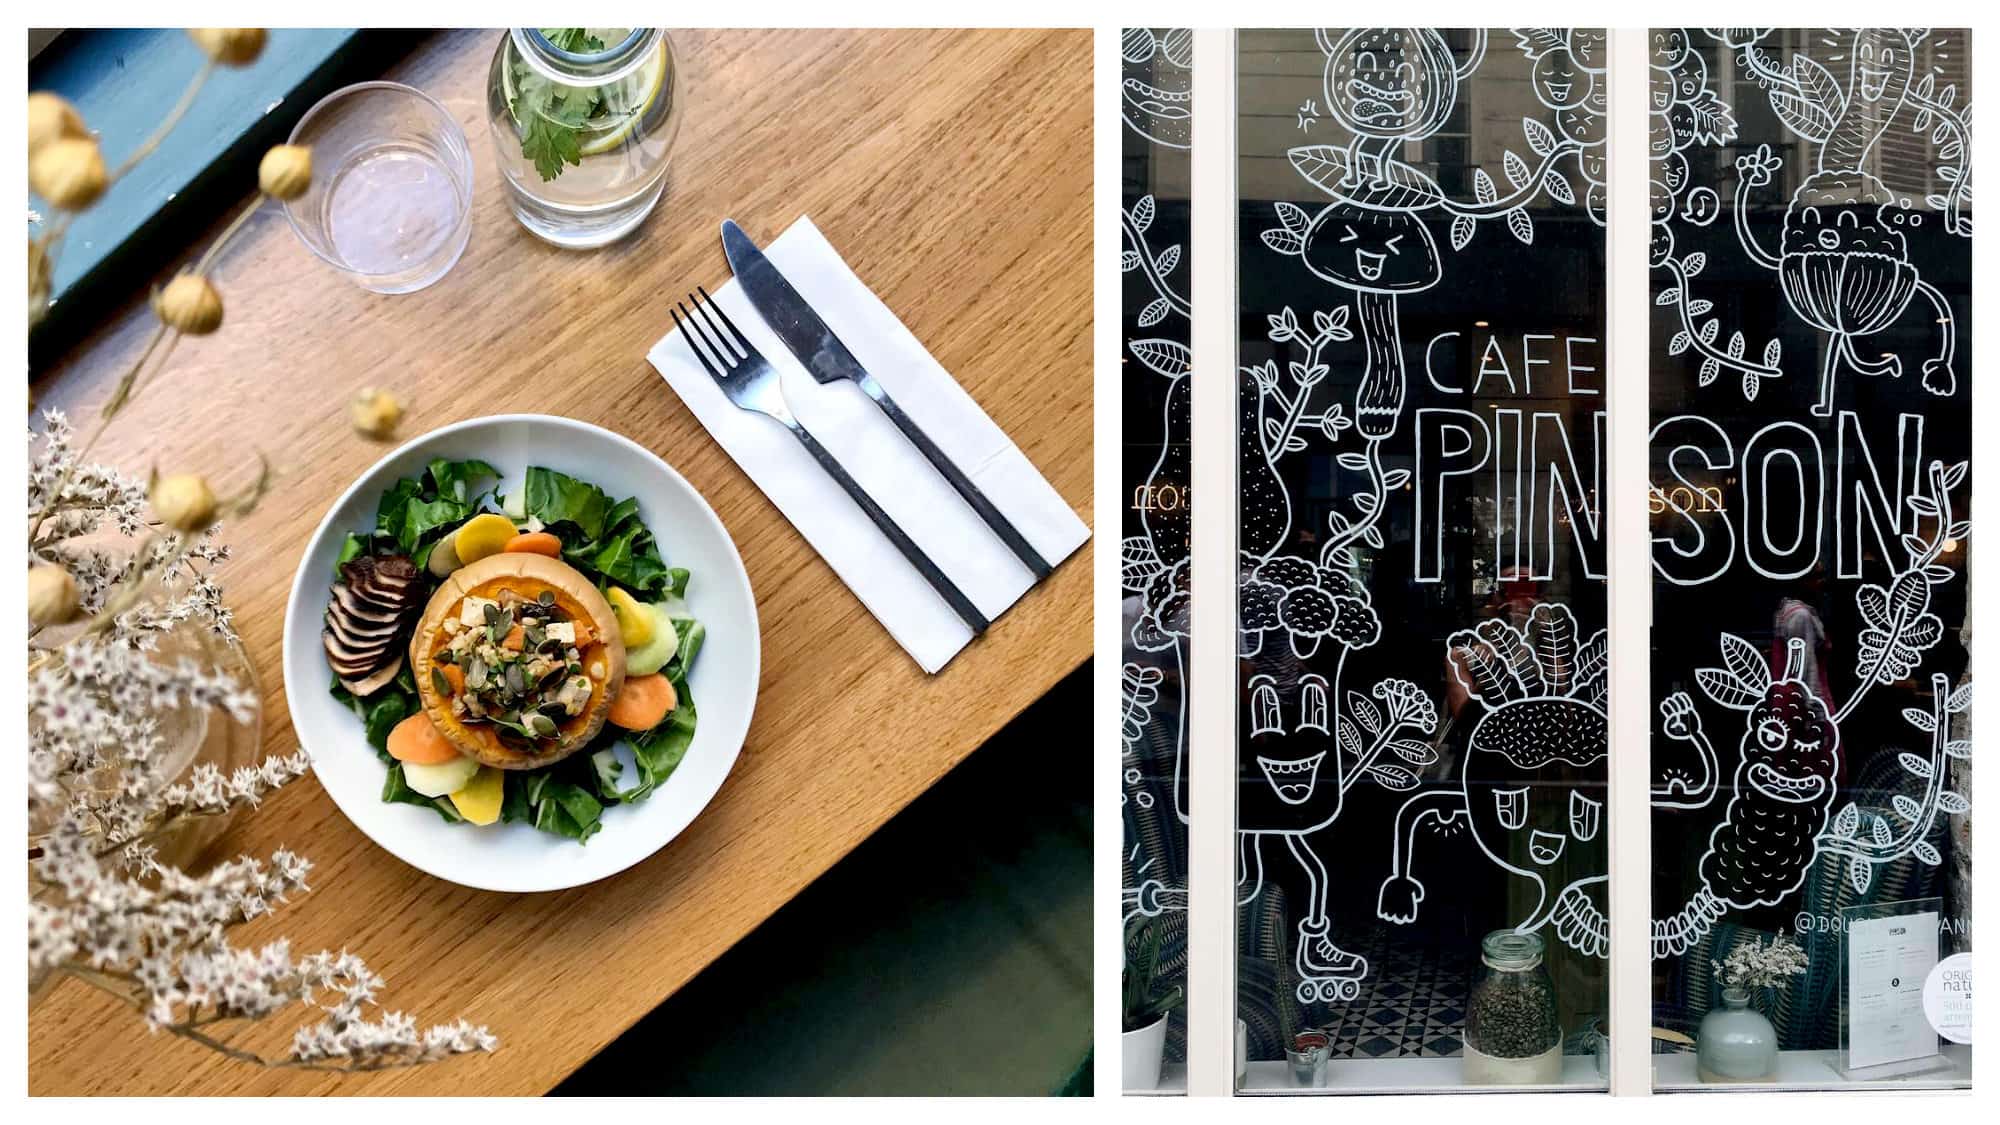 A beautifully presented pumpkin salad with green leaves set down on a wooden table at Café Pinson in Paris (left) and the white cartoon drawings on the café's window (right).